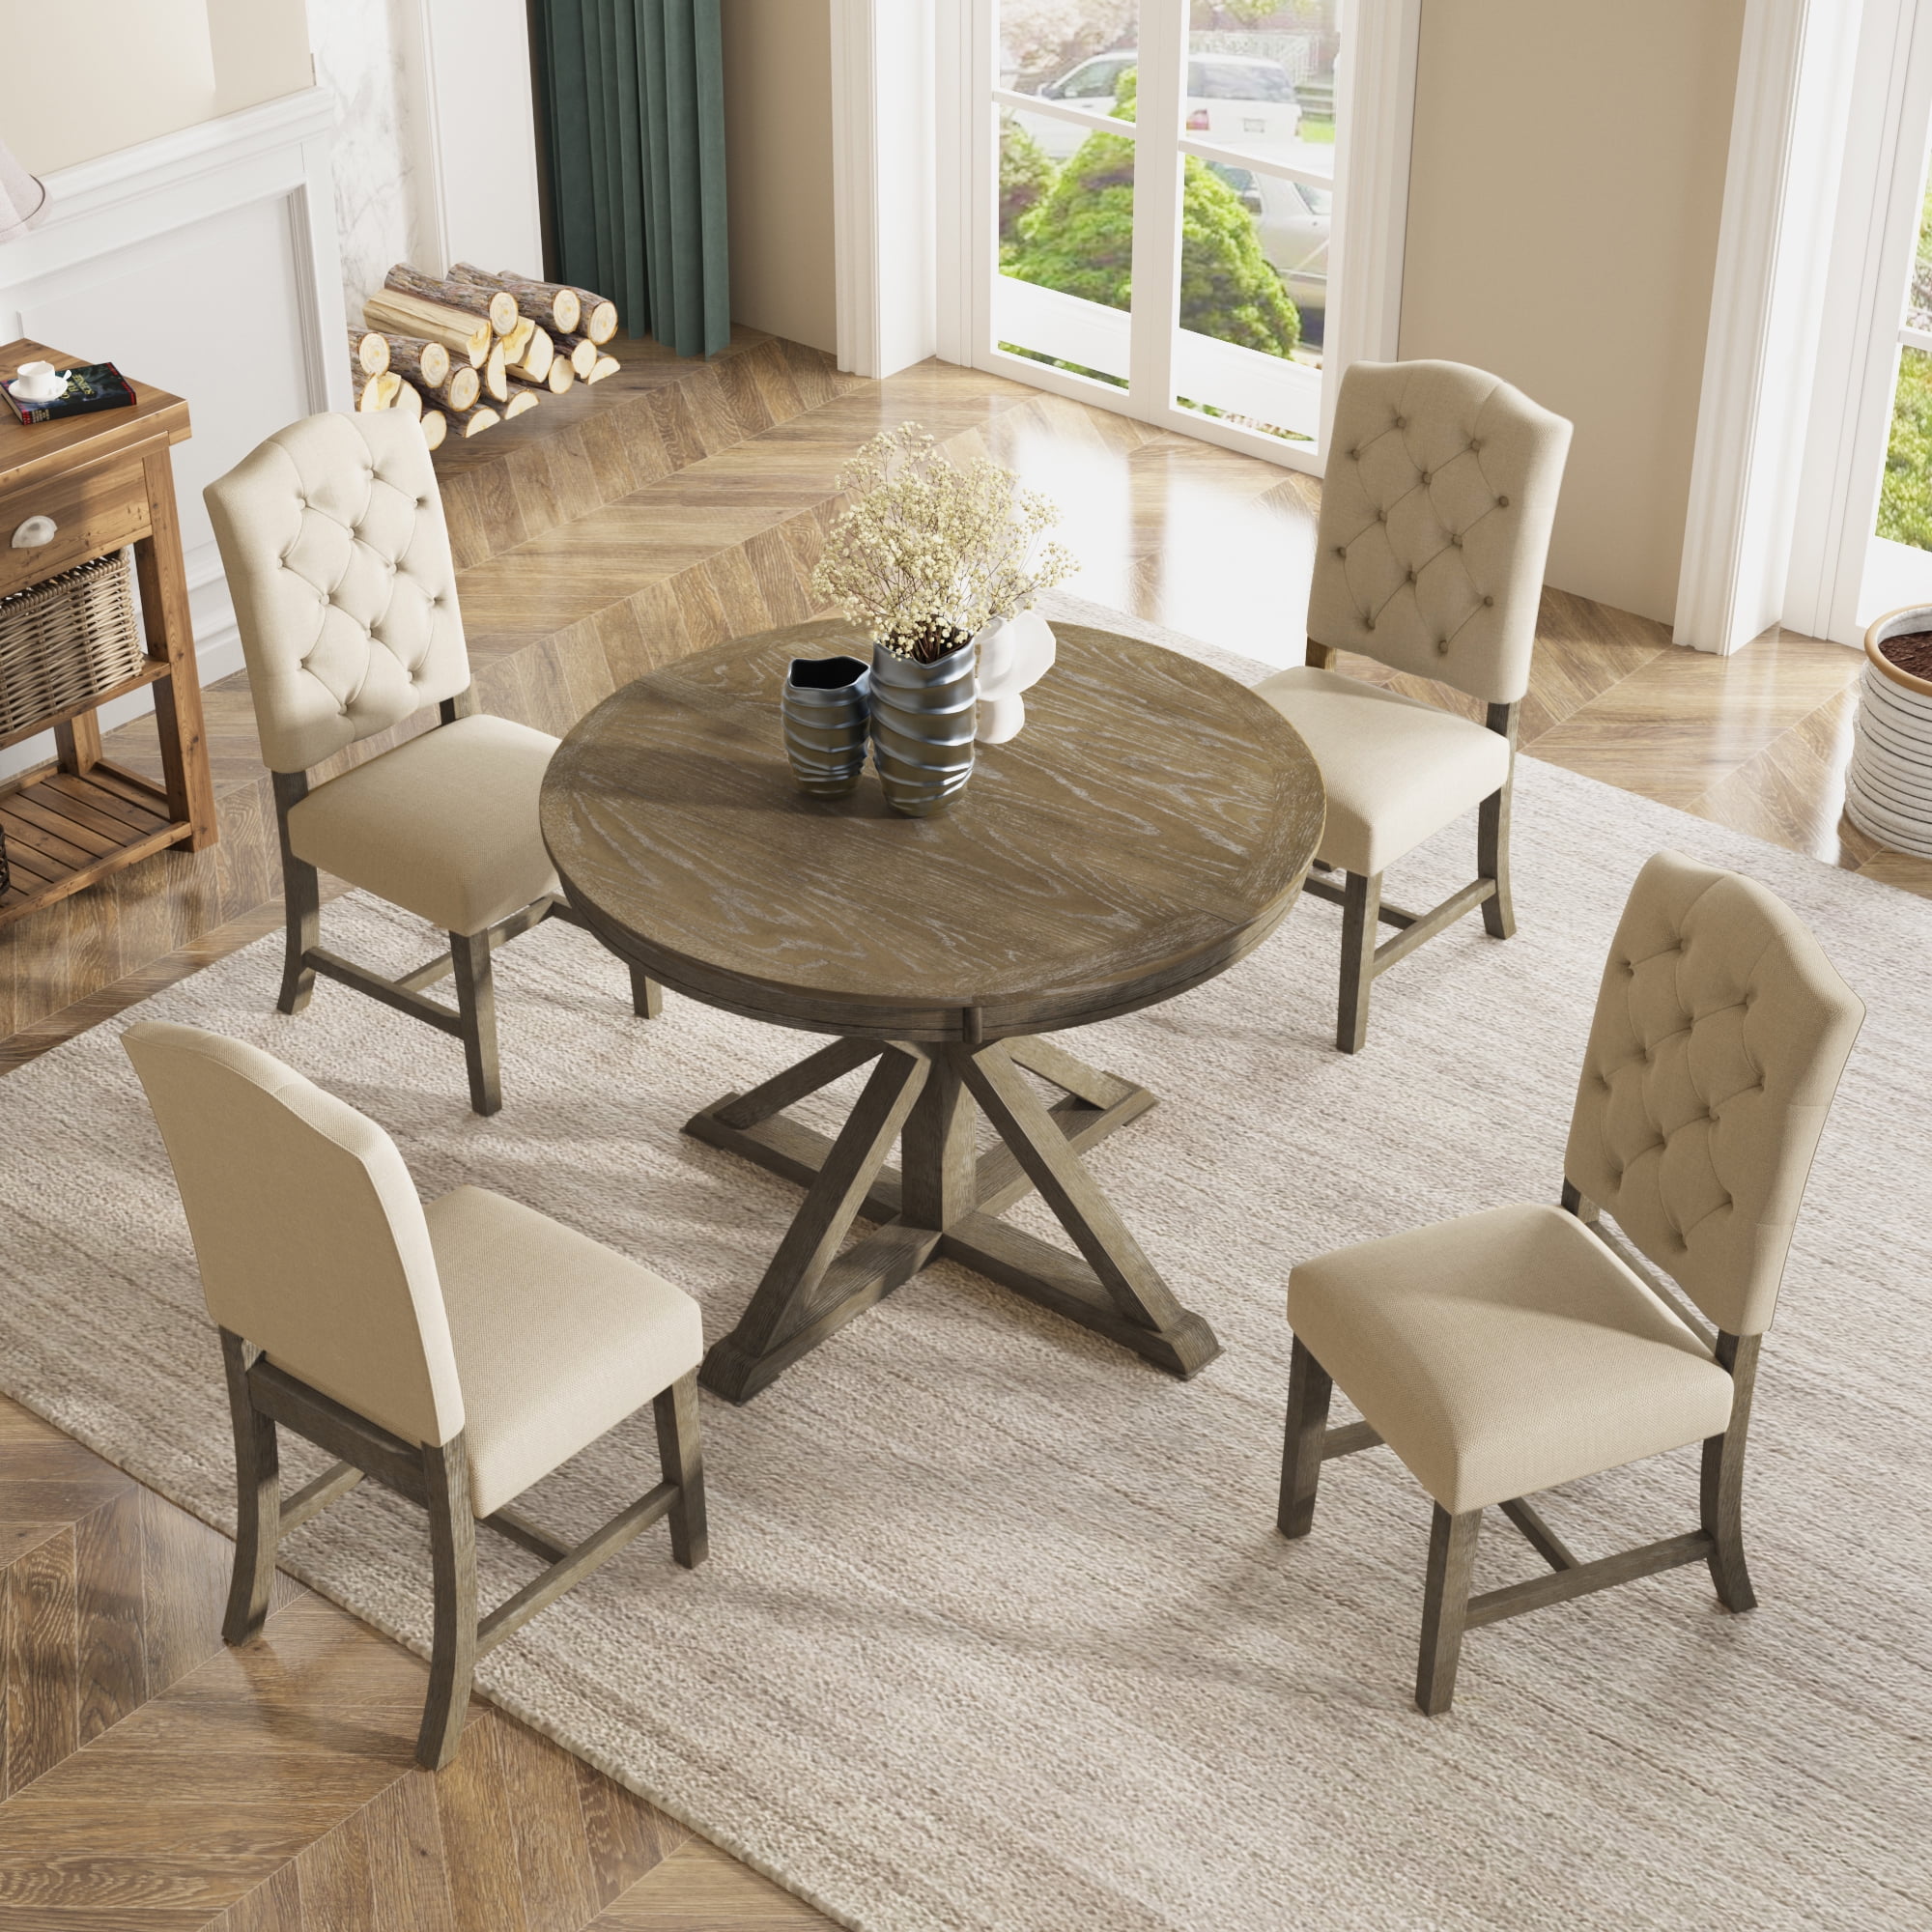 Rustic Dining Table Set For 4 Round